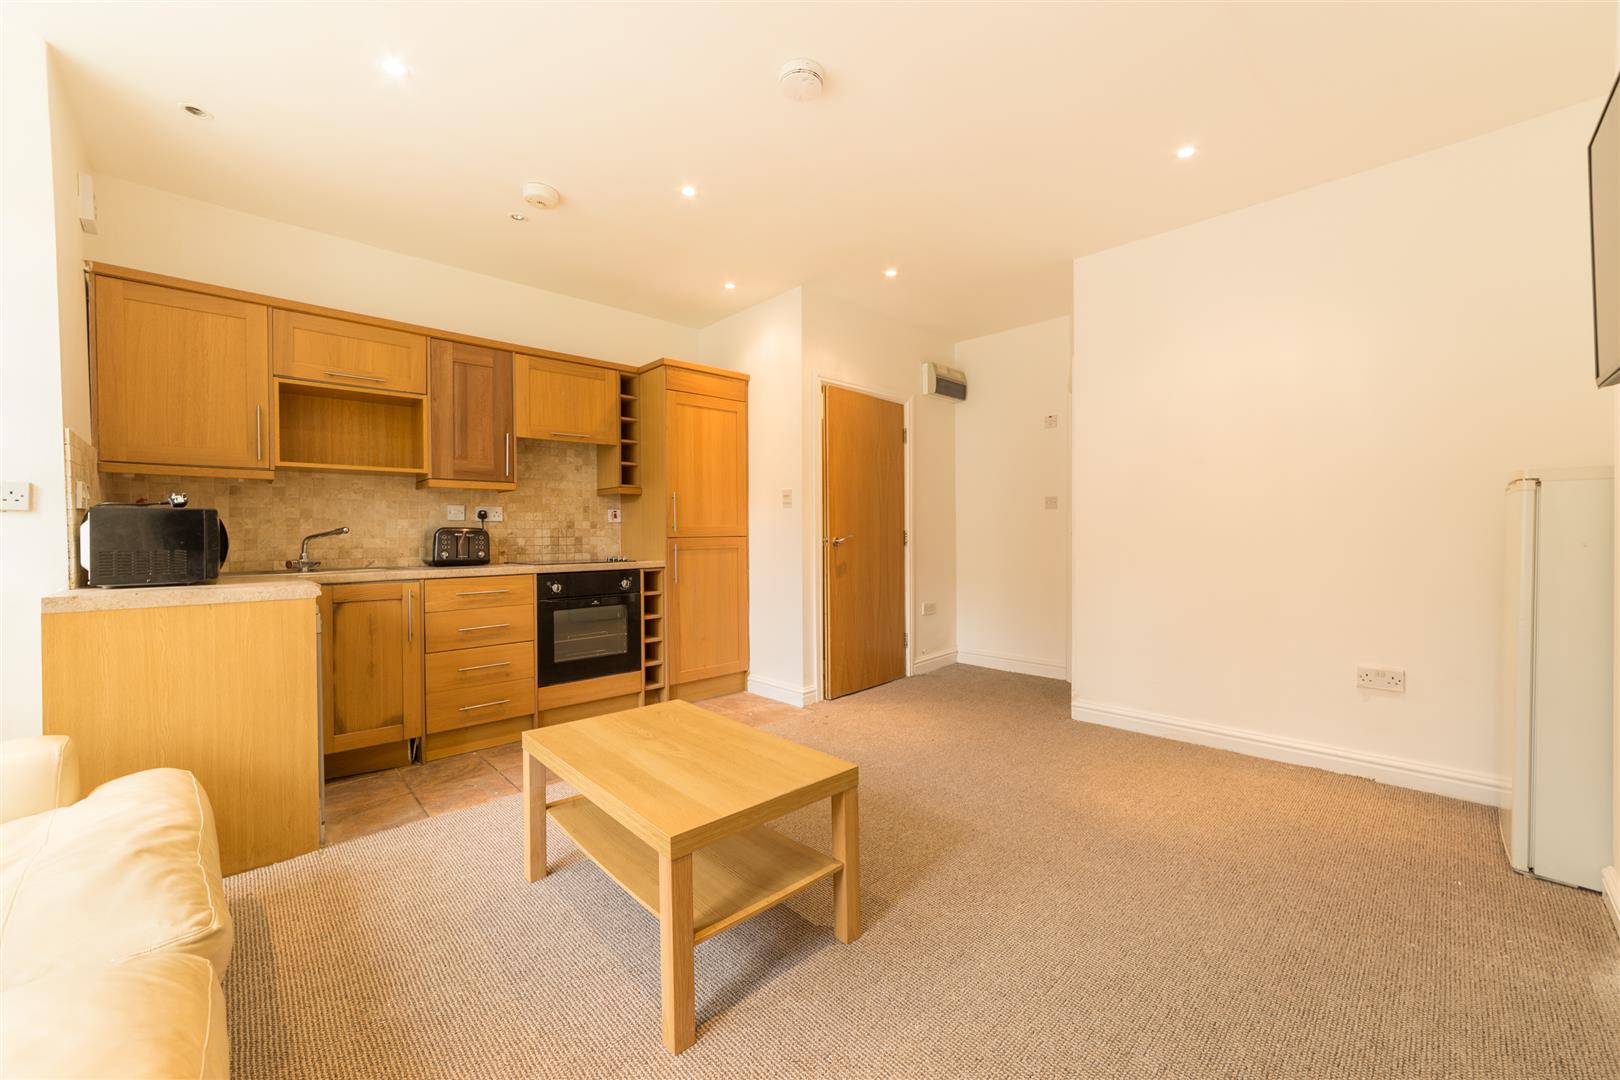 5 bed flat to rent in North Bank, Jesmond - Property Image 1